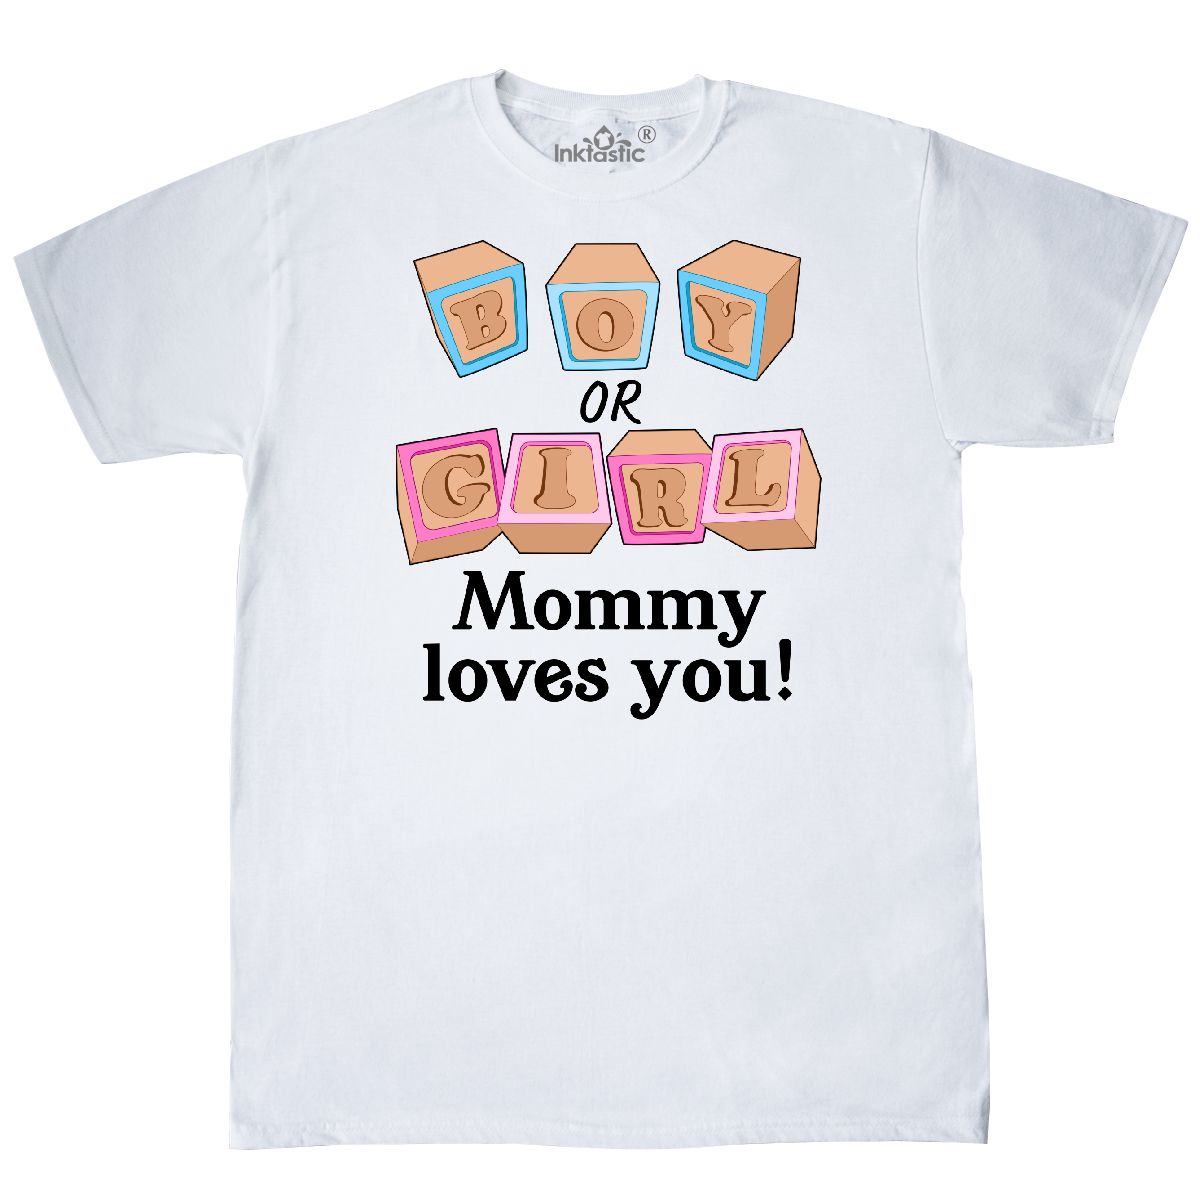 Details About Inktastic Boy Or Girl Mommy Loves You T Shirt Gender Reveal Mama Mom Mother - 